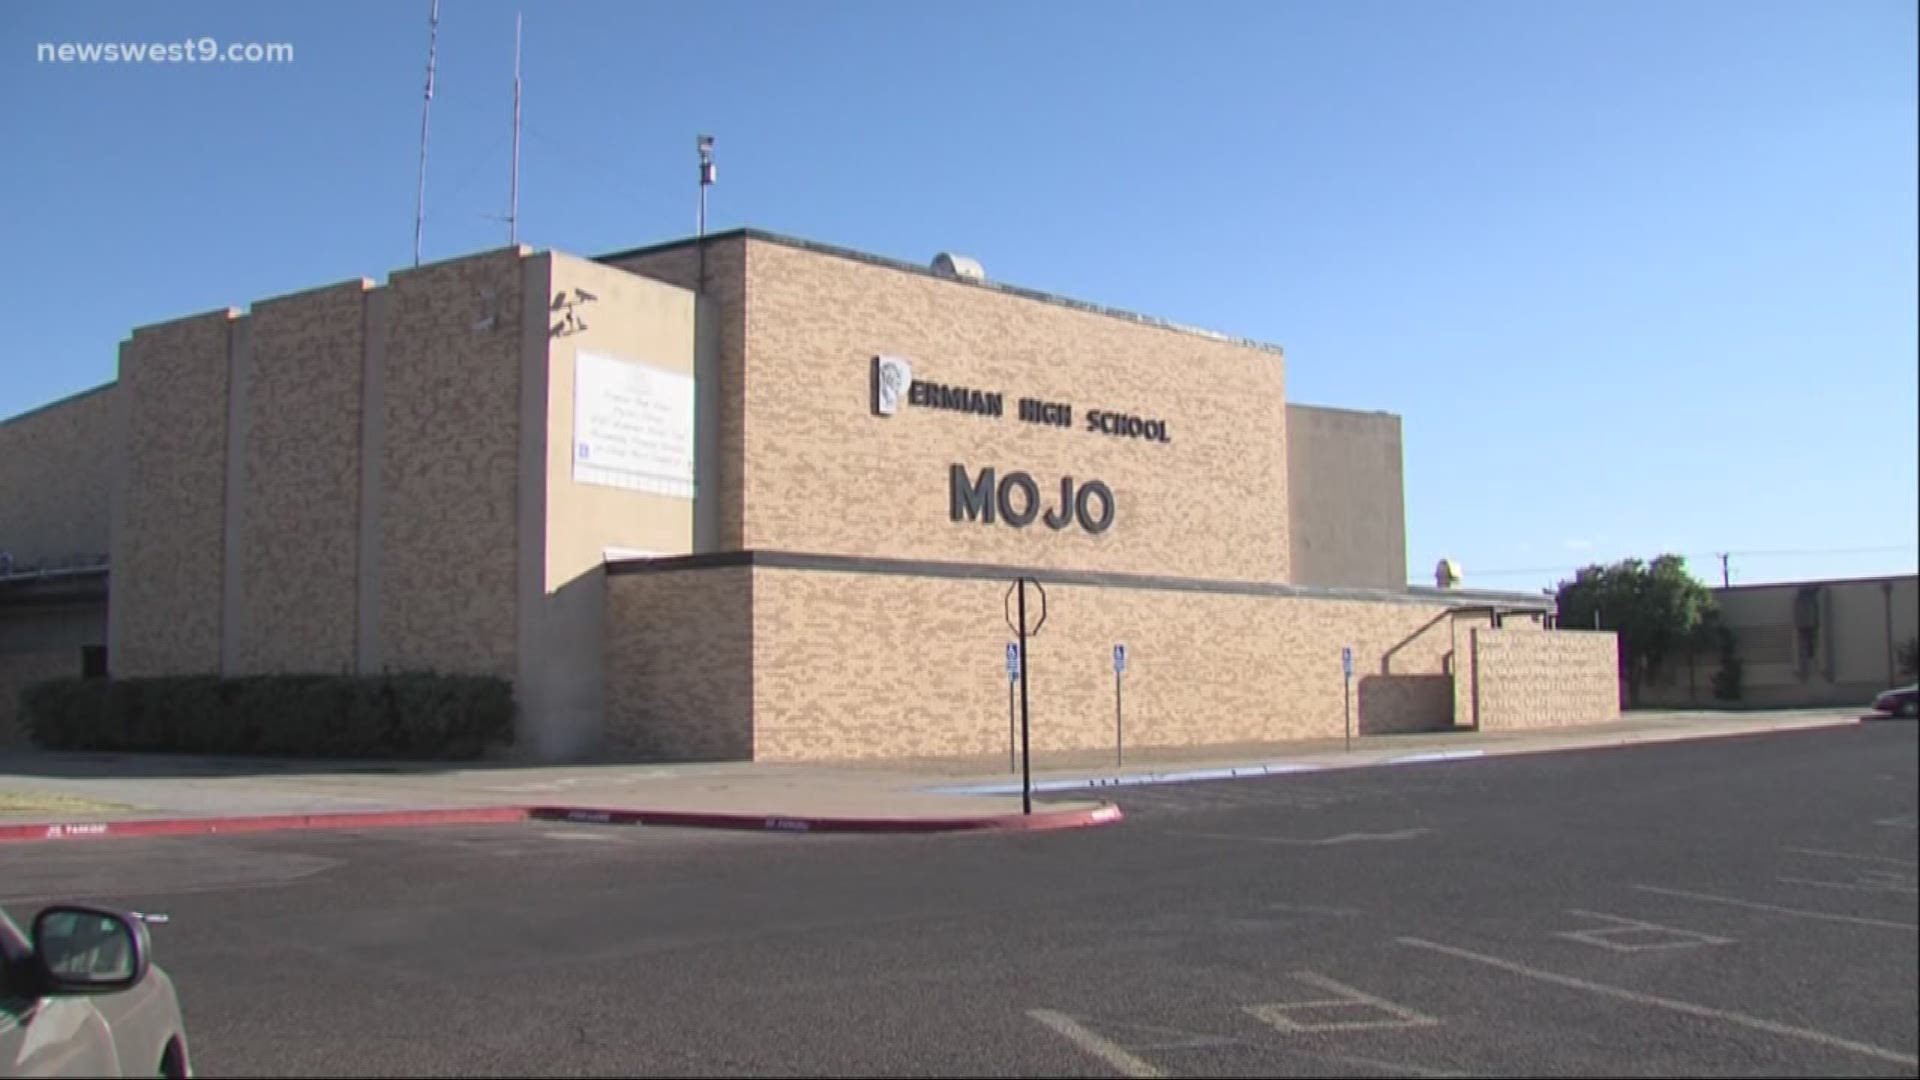 ECISD says two other students from different campuses were also arrested on Monday for unrelated threats.